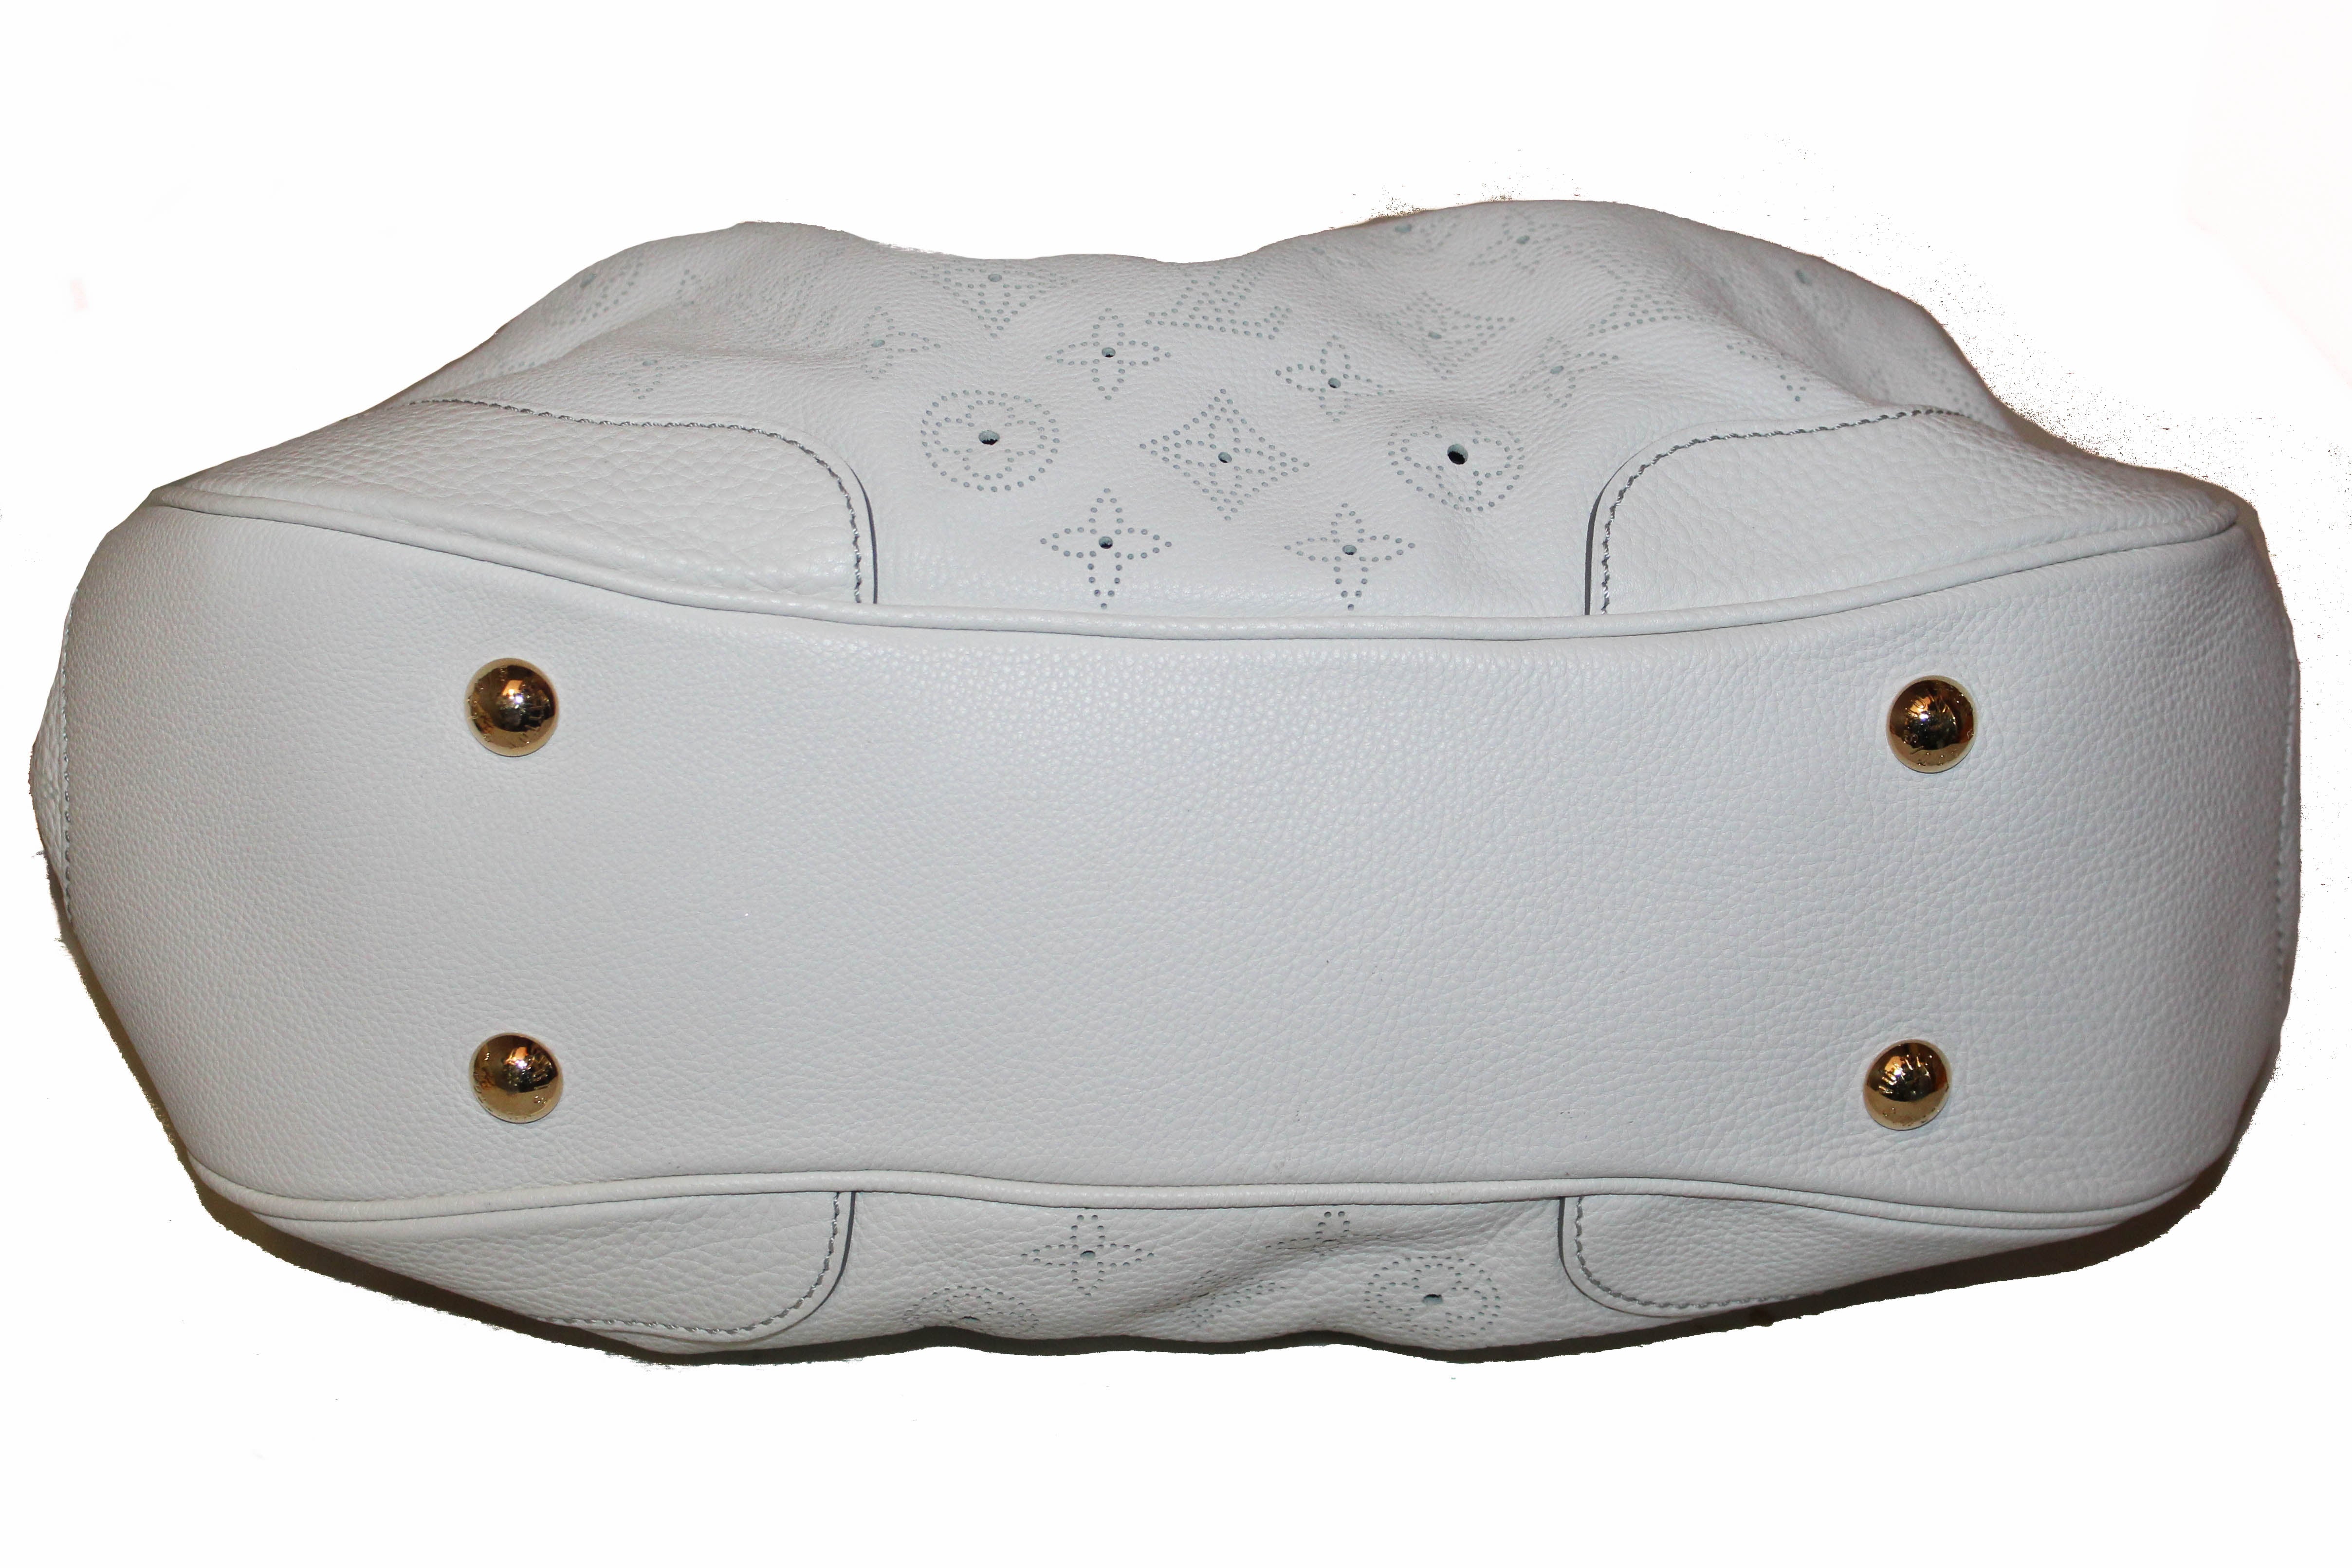 LOUIS VUITTON White Mahina Perforated Leather Bag #41118 – ALL YOUR BLISS